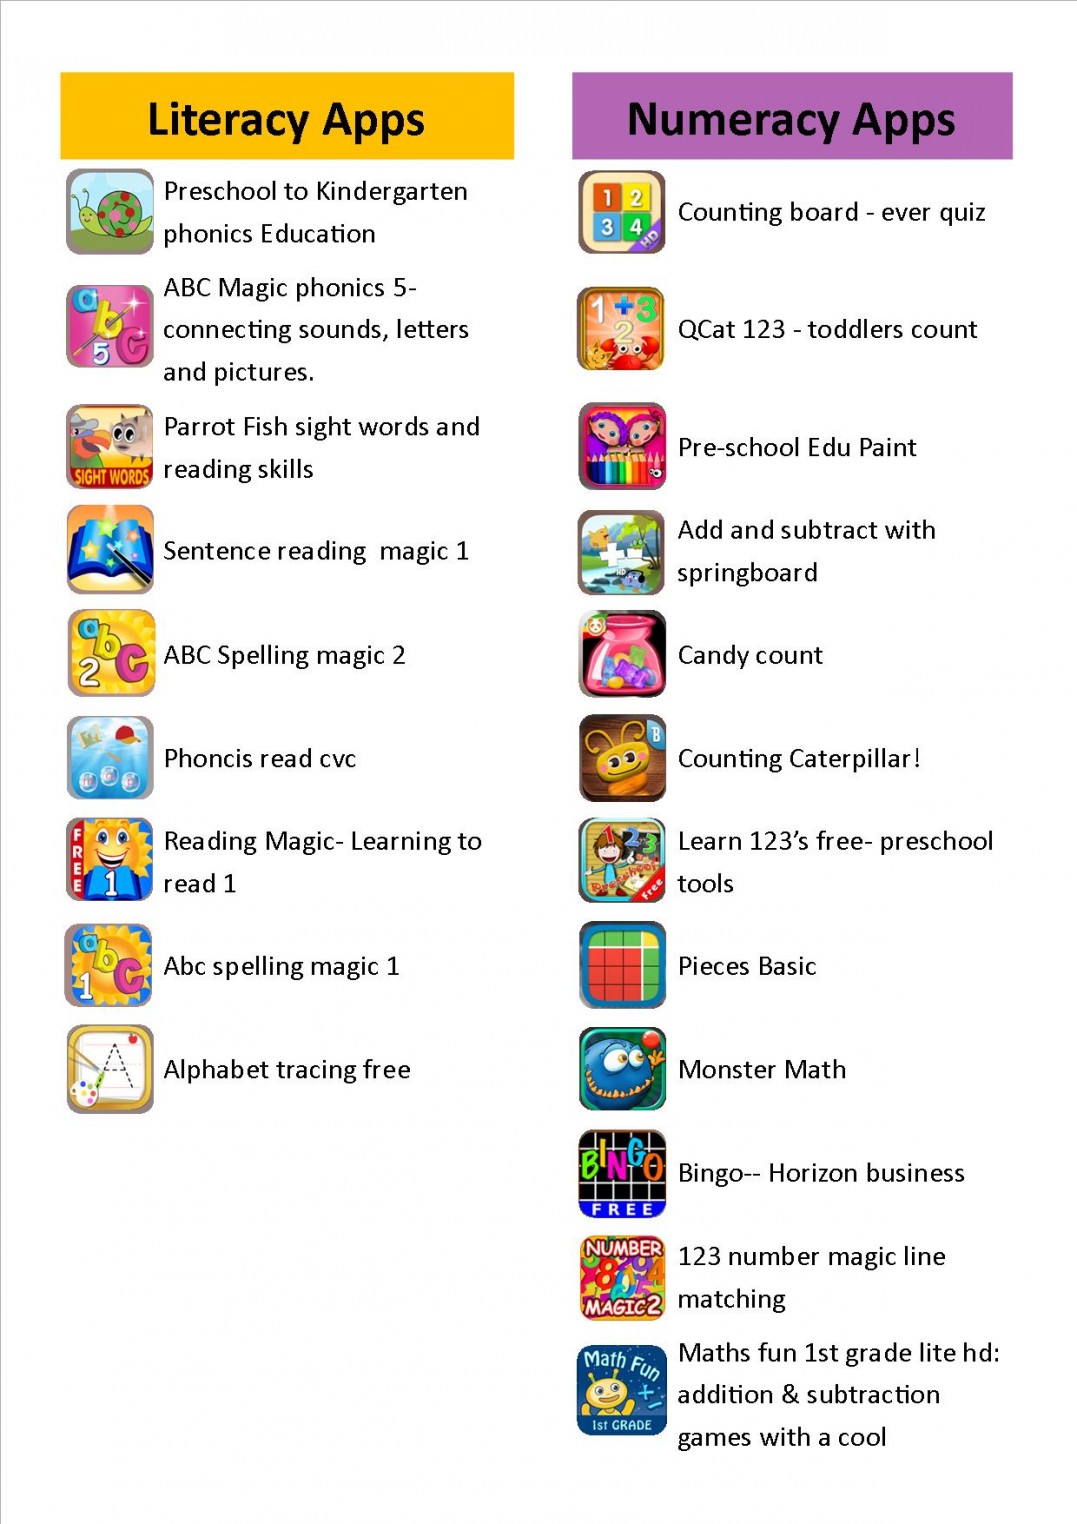 List of Apps